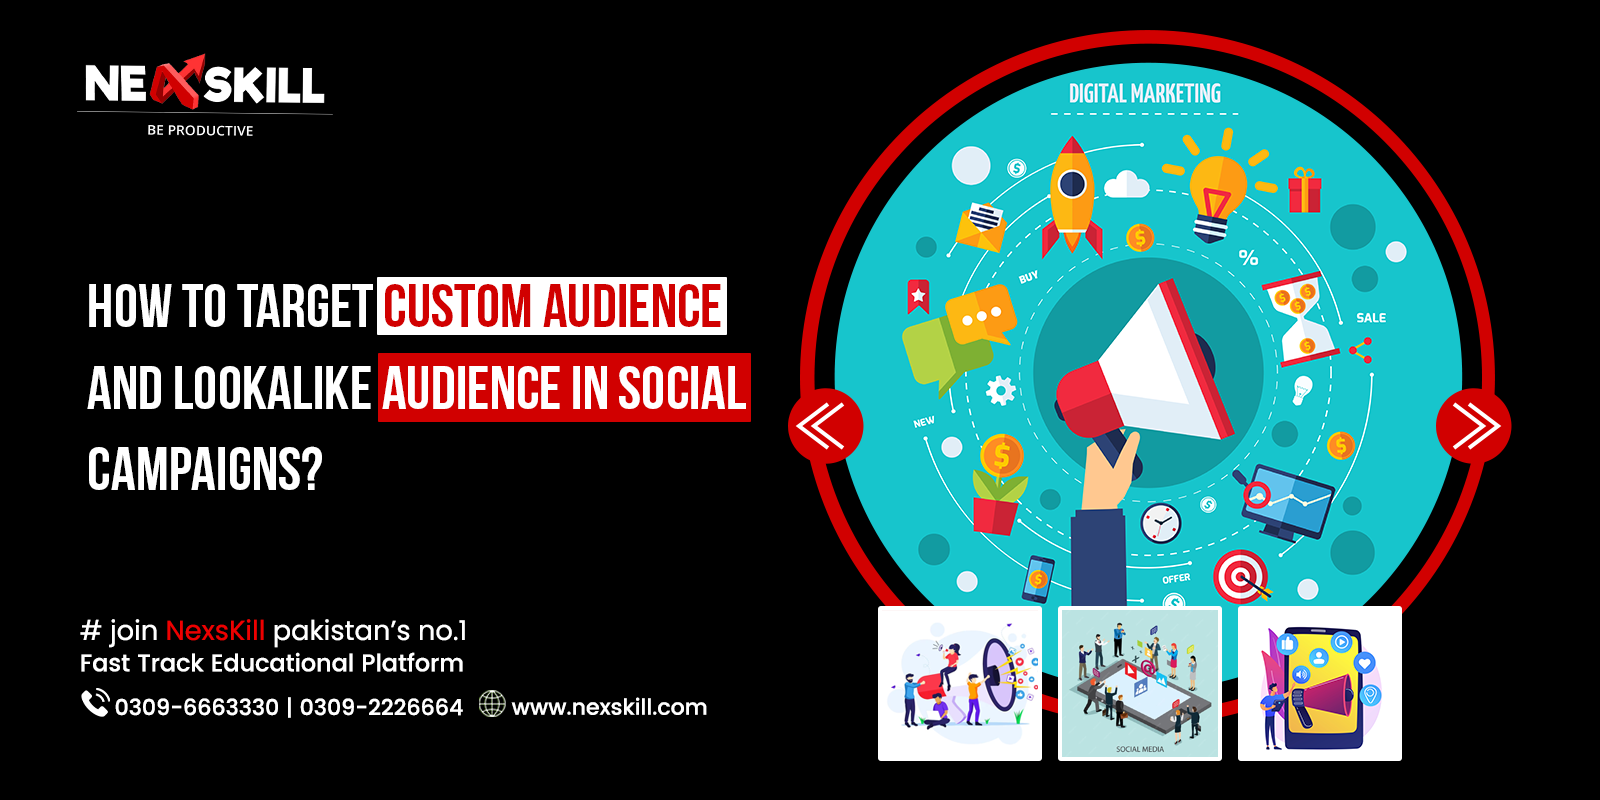 How to Target Custom Audience and Lookalike Audience in Social Campaigns?